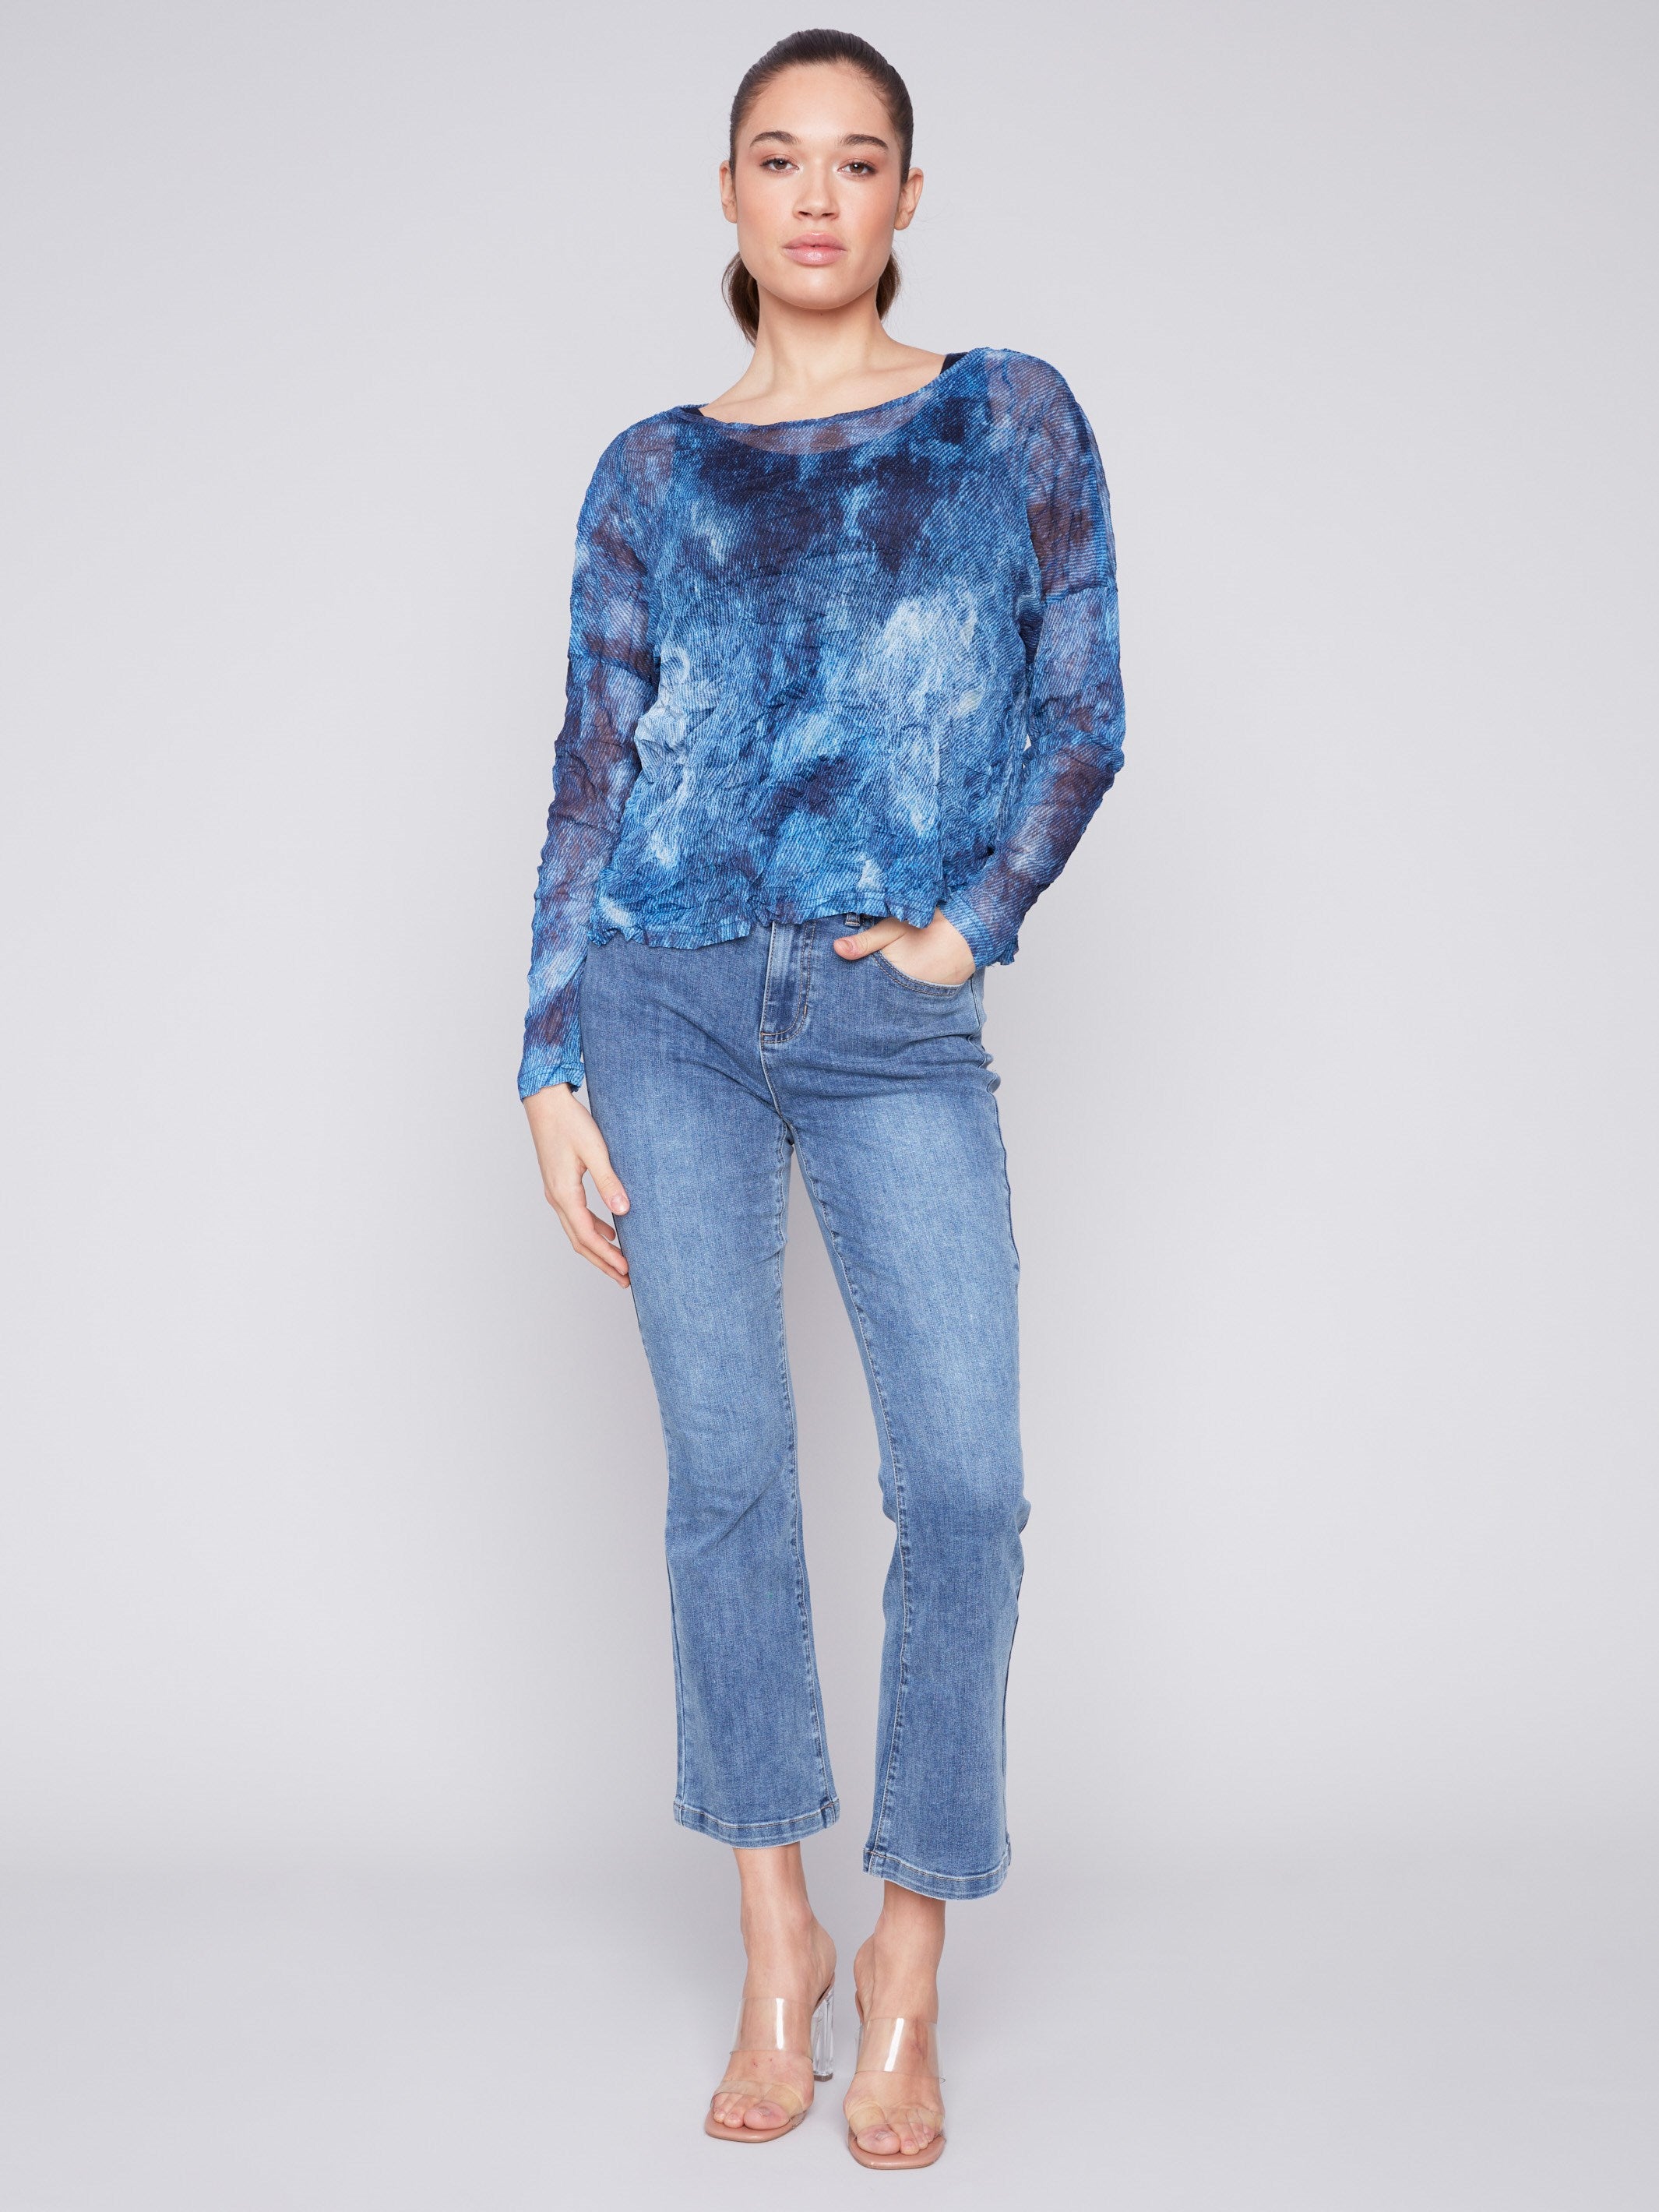 Printed Crinkle Mesh Top - Denim - Charlie B Collection Canada - Image 3